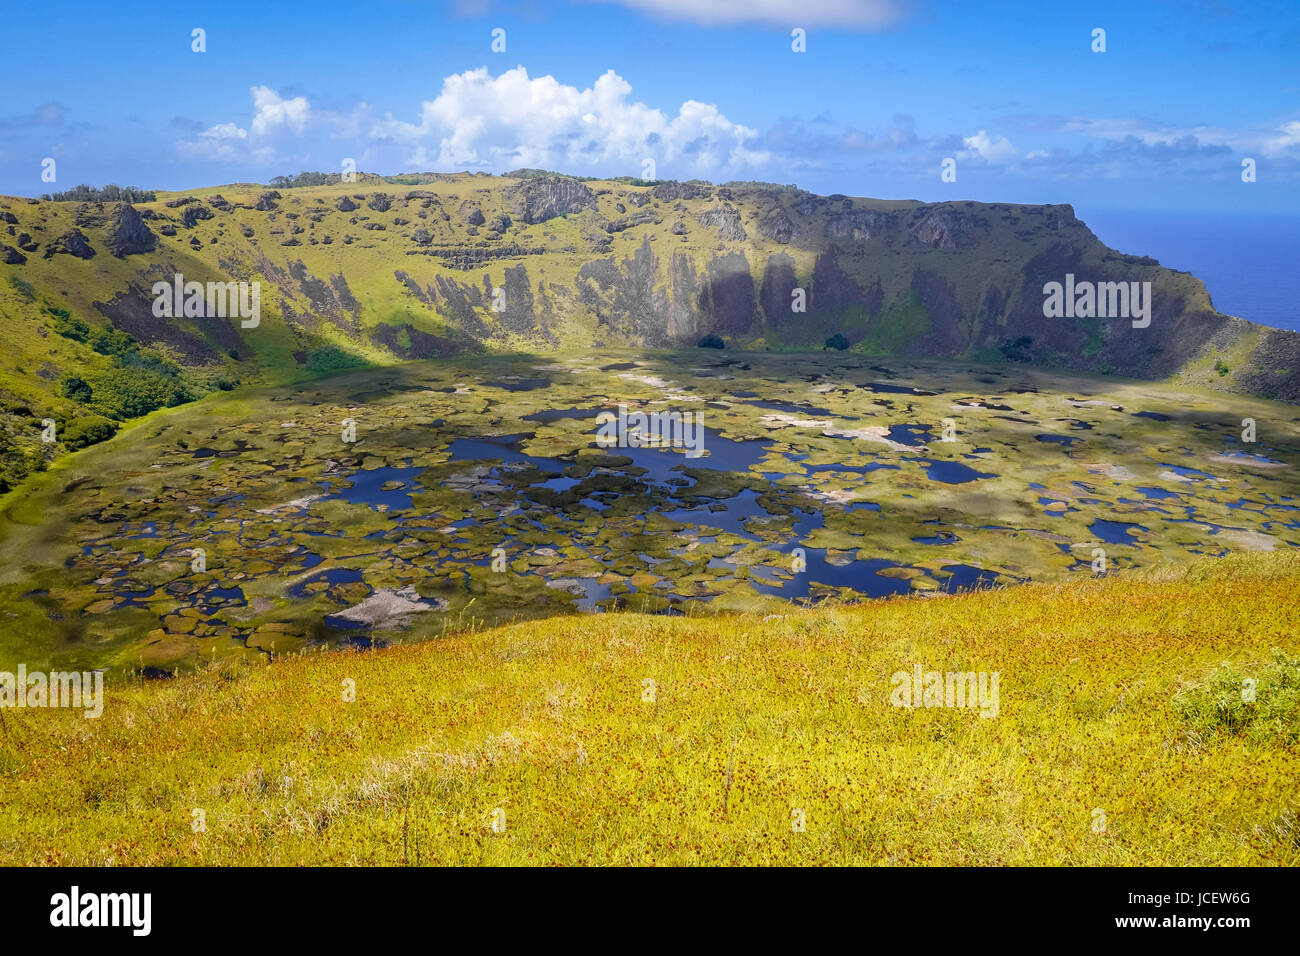 Rano Kau volcano crater in Easter Island, Chile Stock Photo